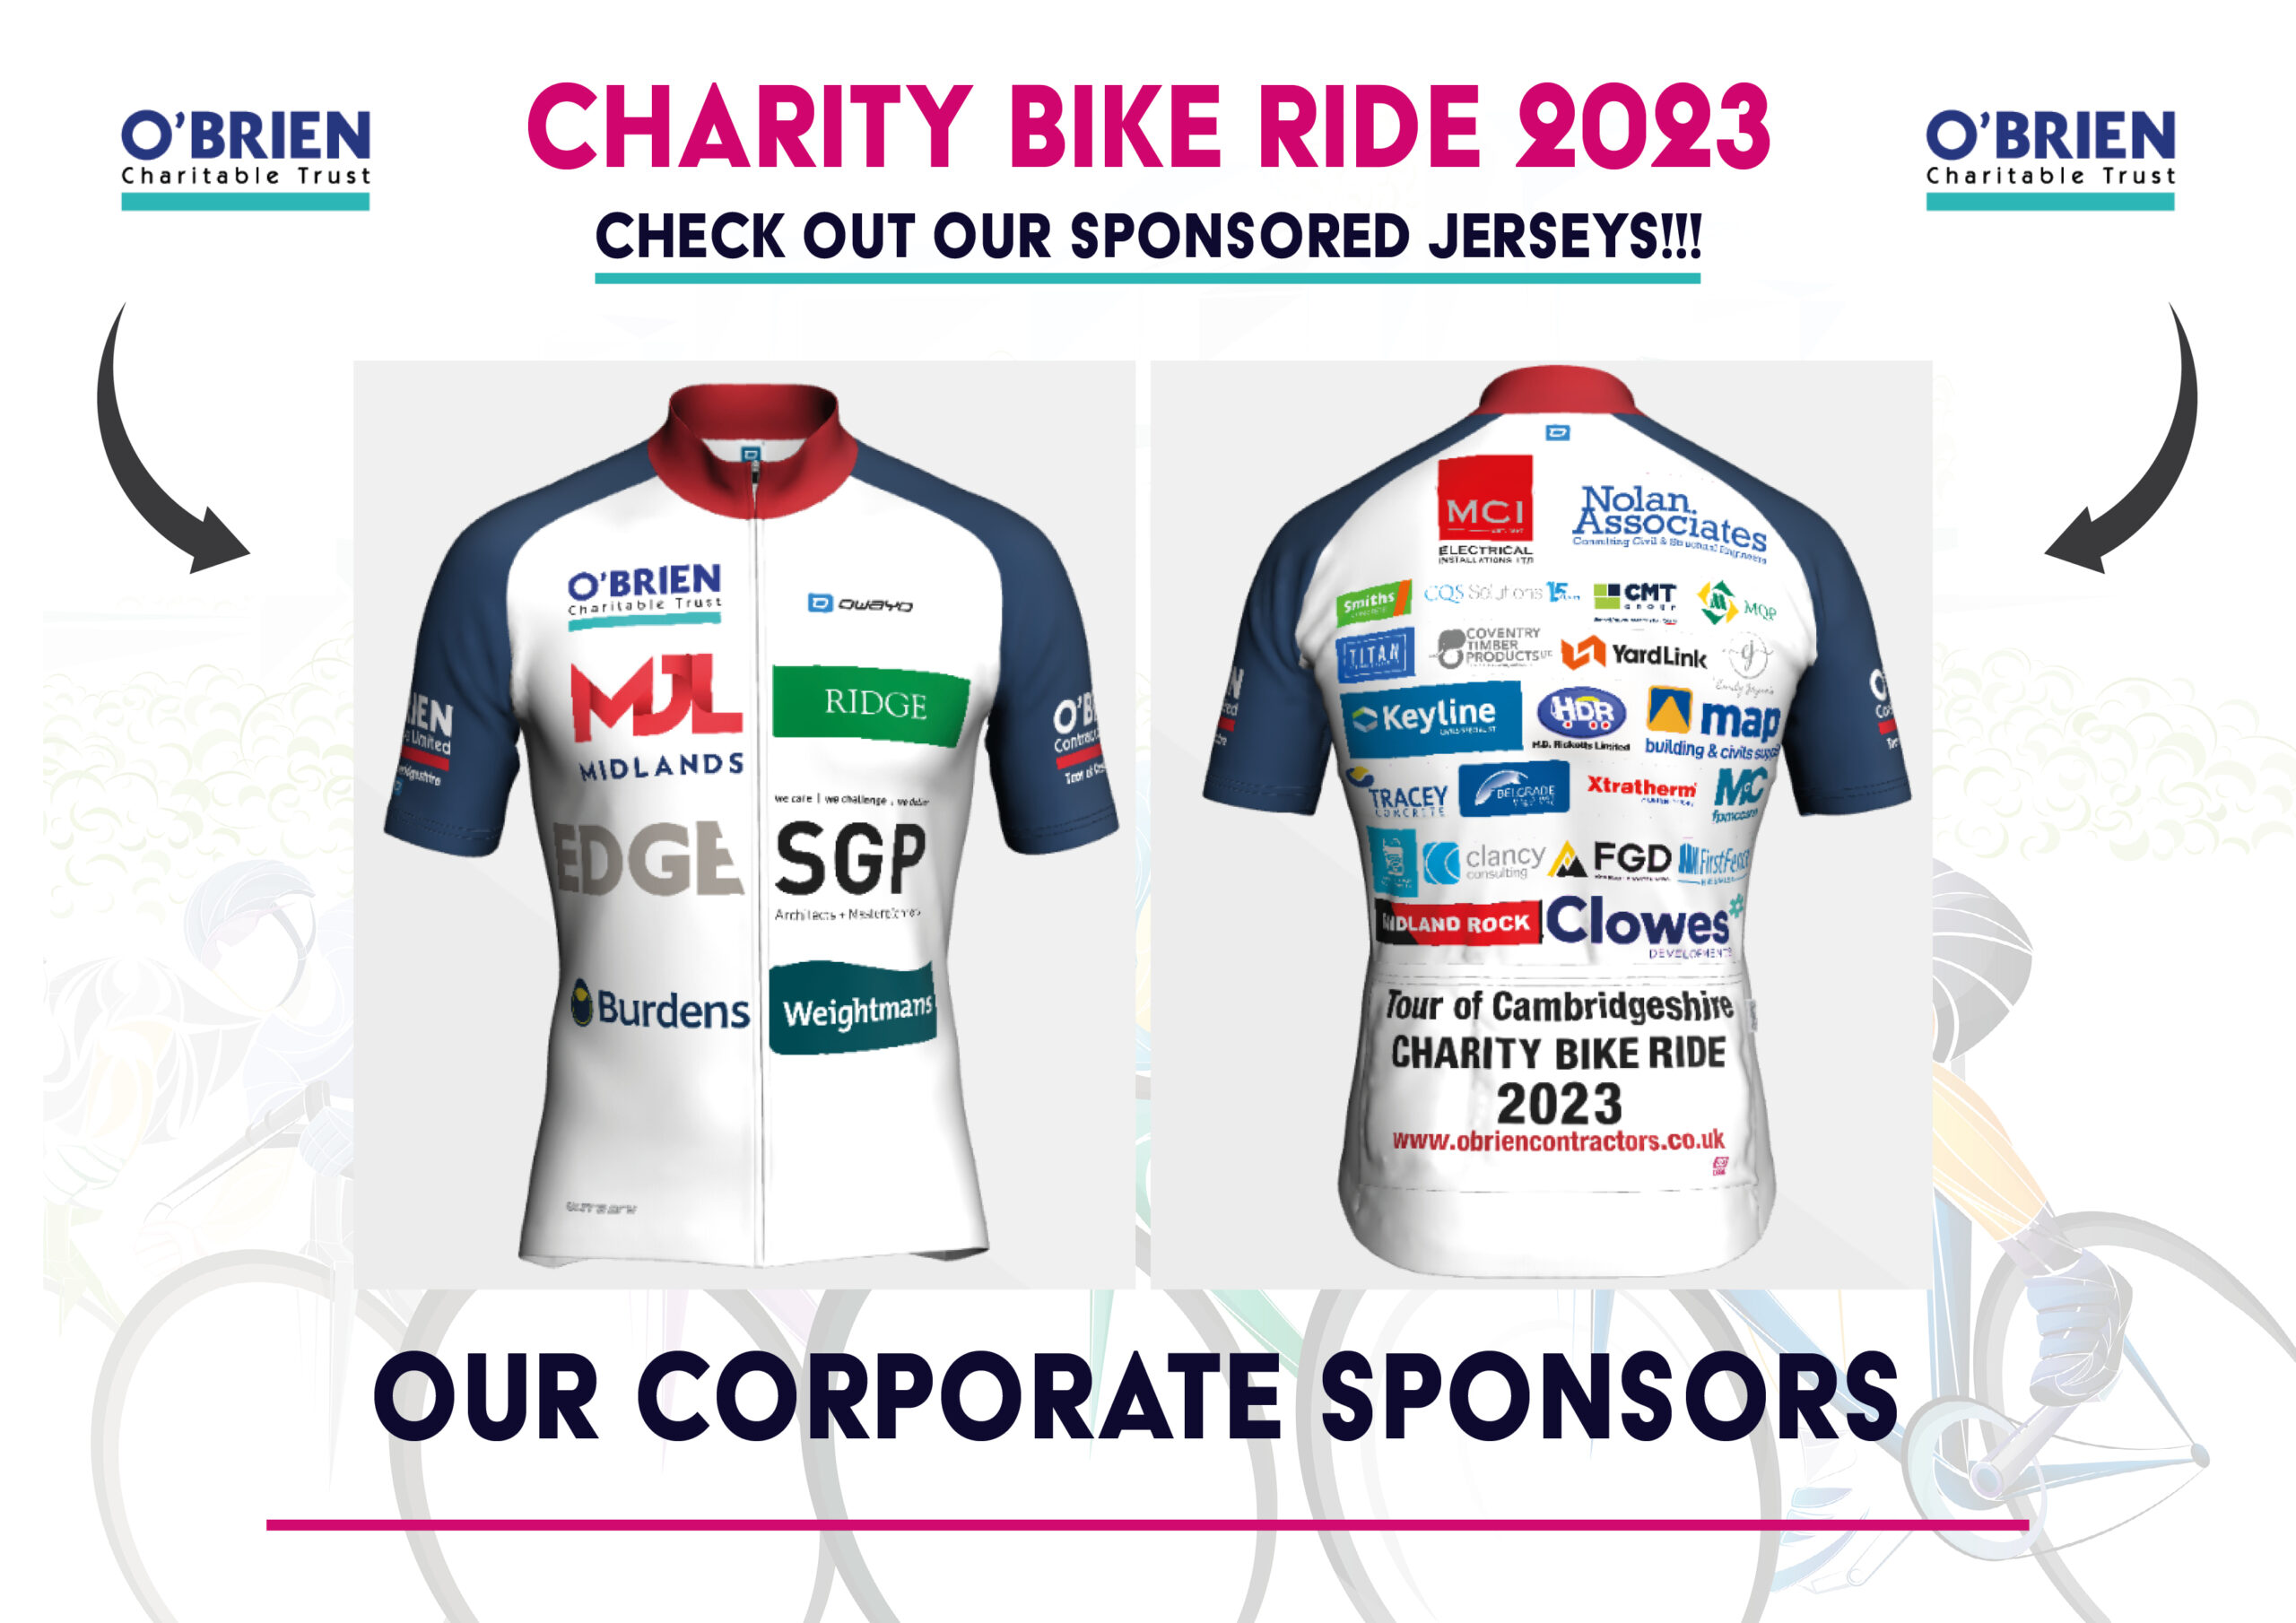 Gearing up for the Charity Bike Ride